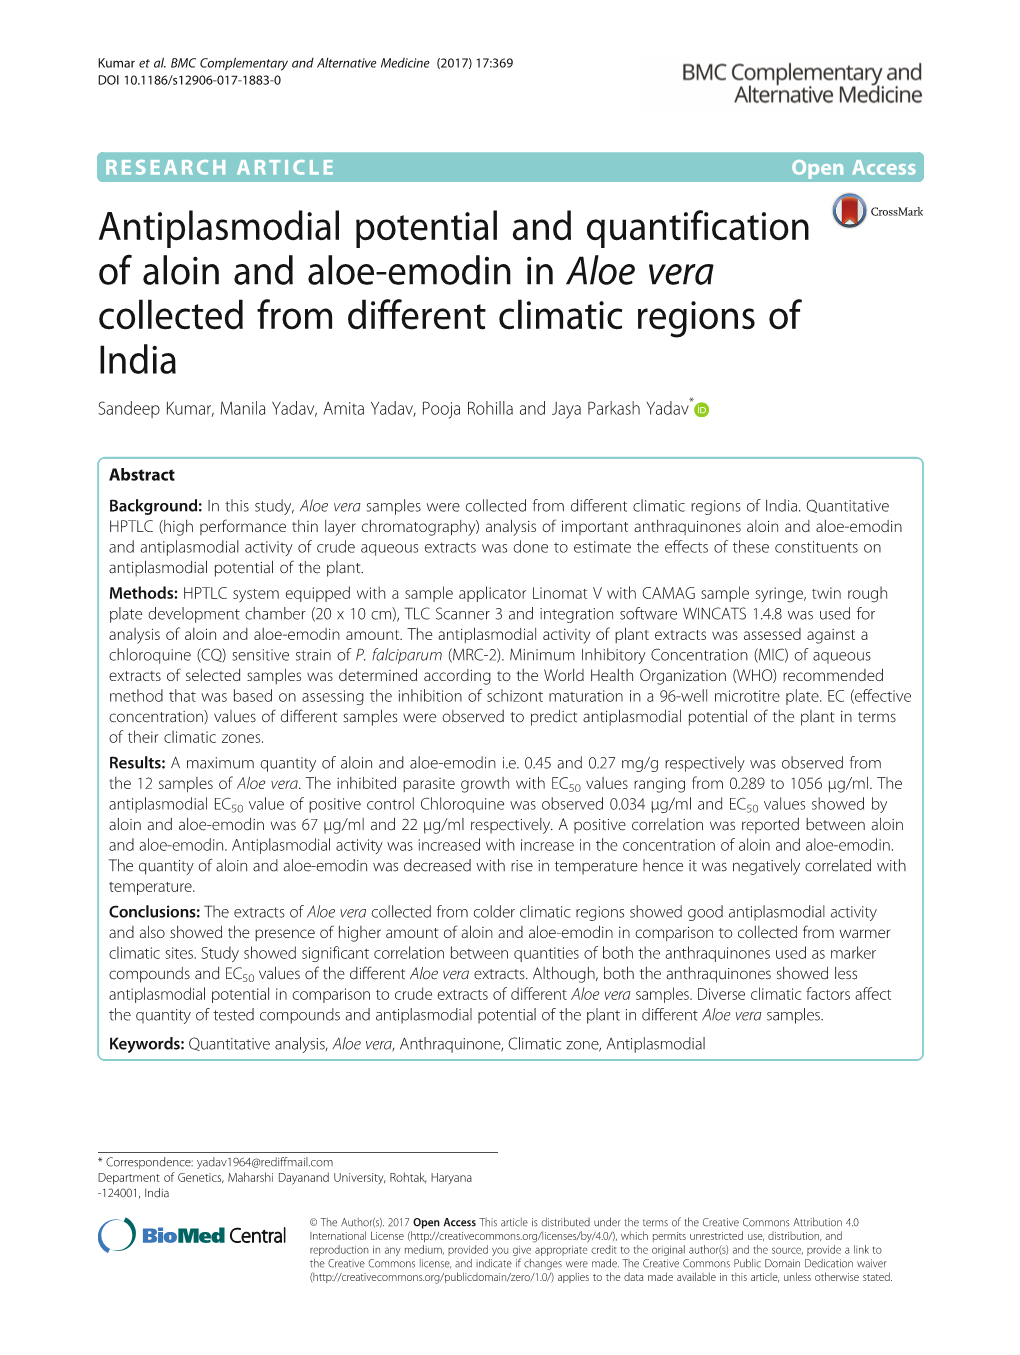 Antiplasmodial Potential and Quantification of Aloin and Aloe